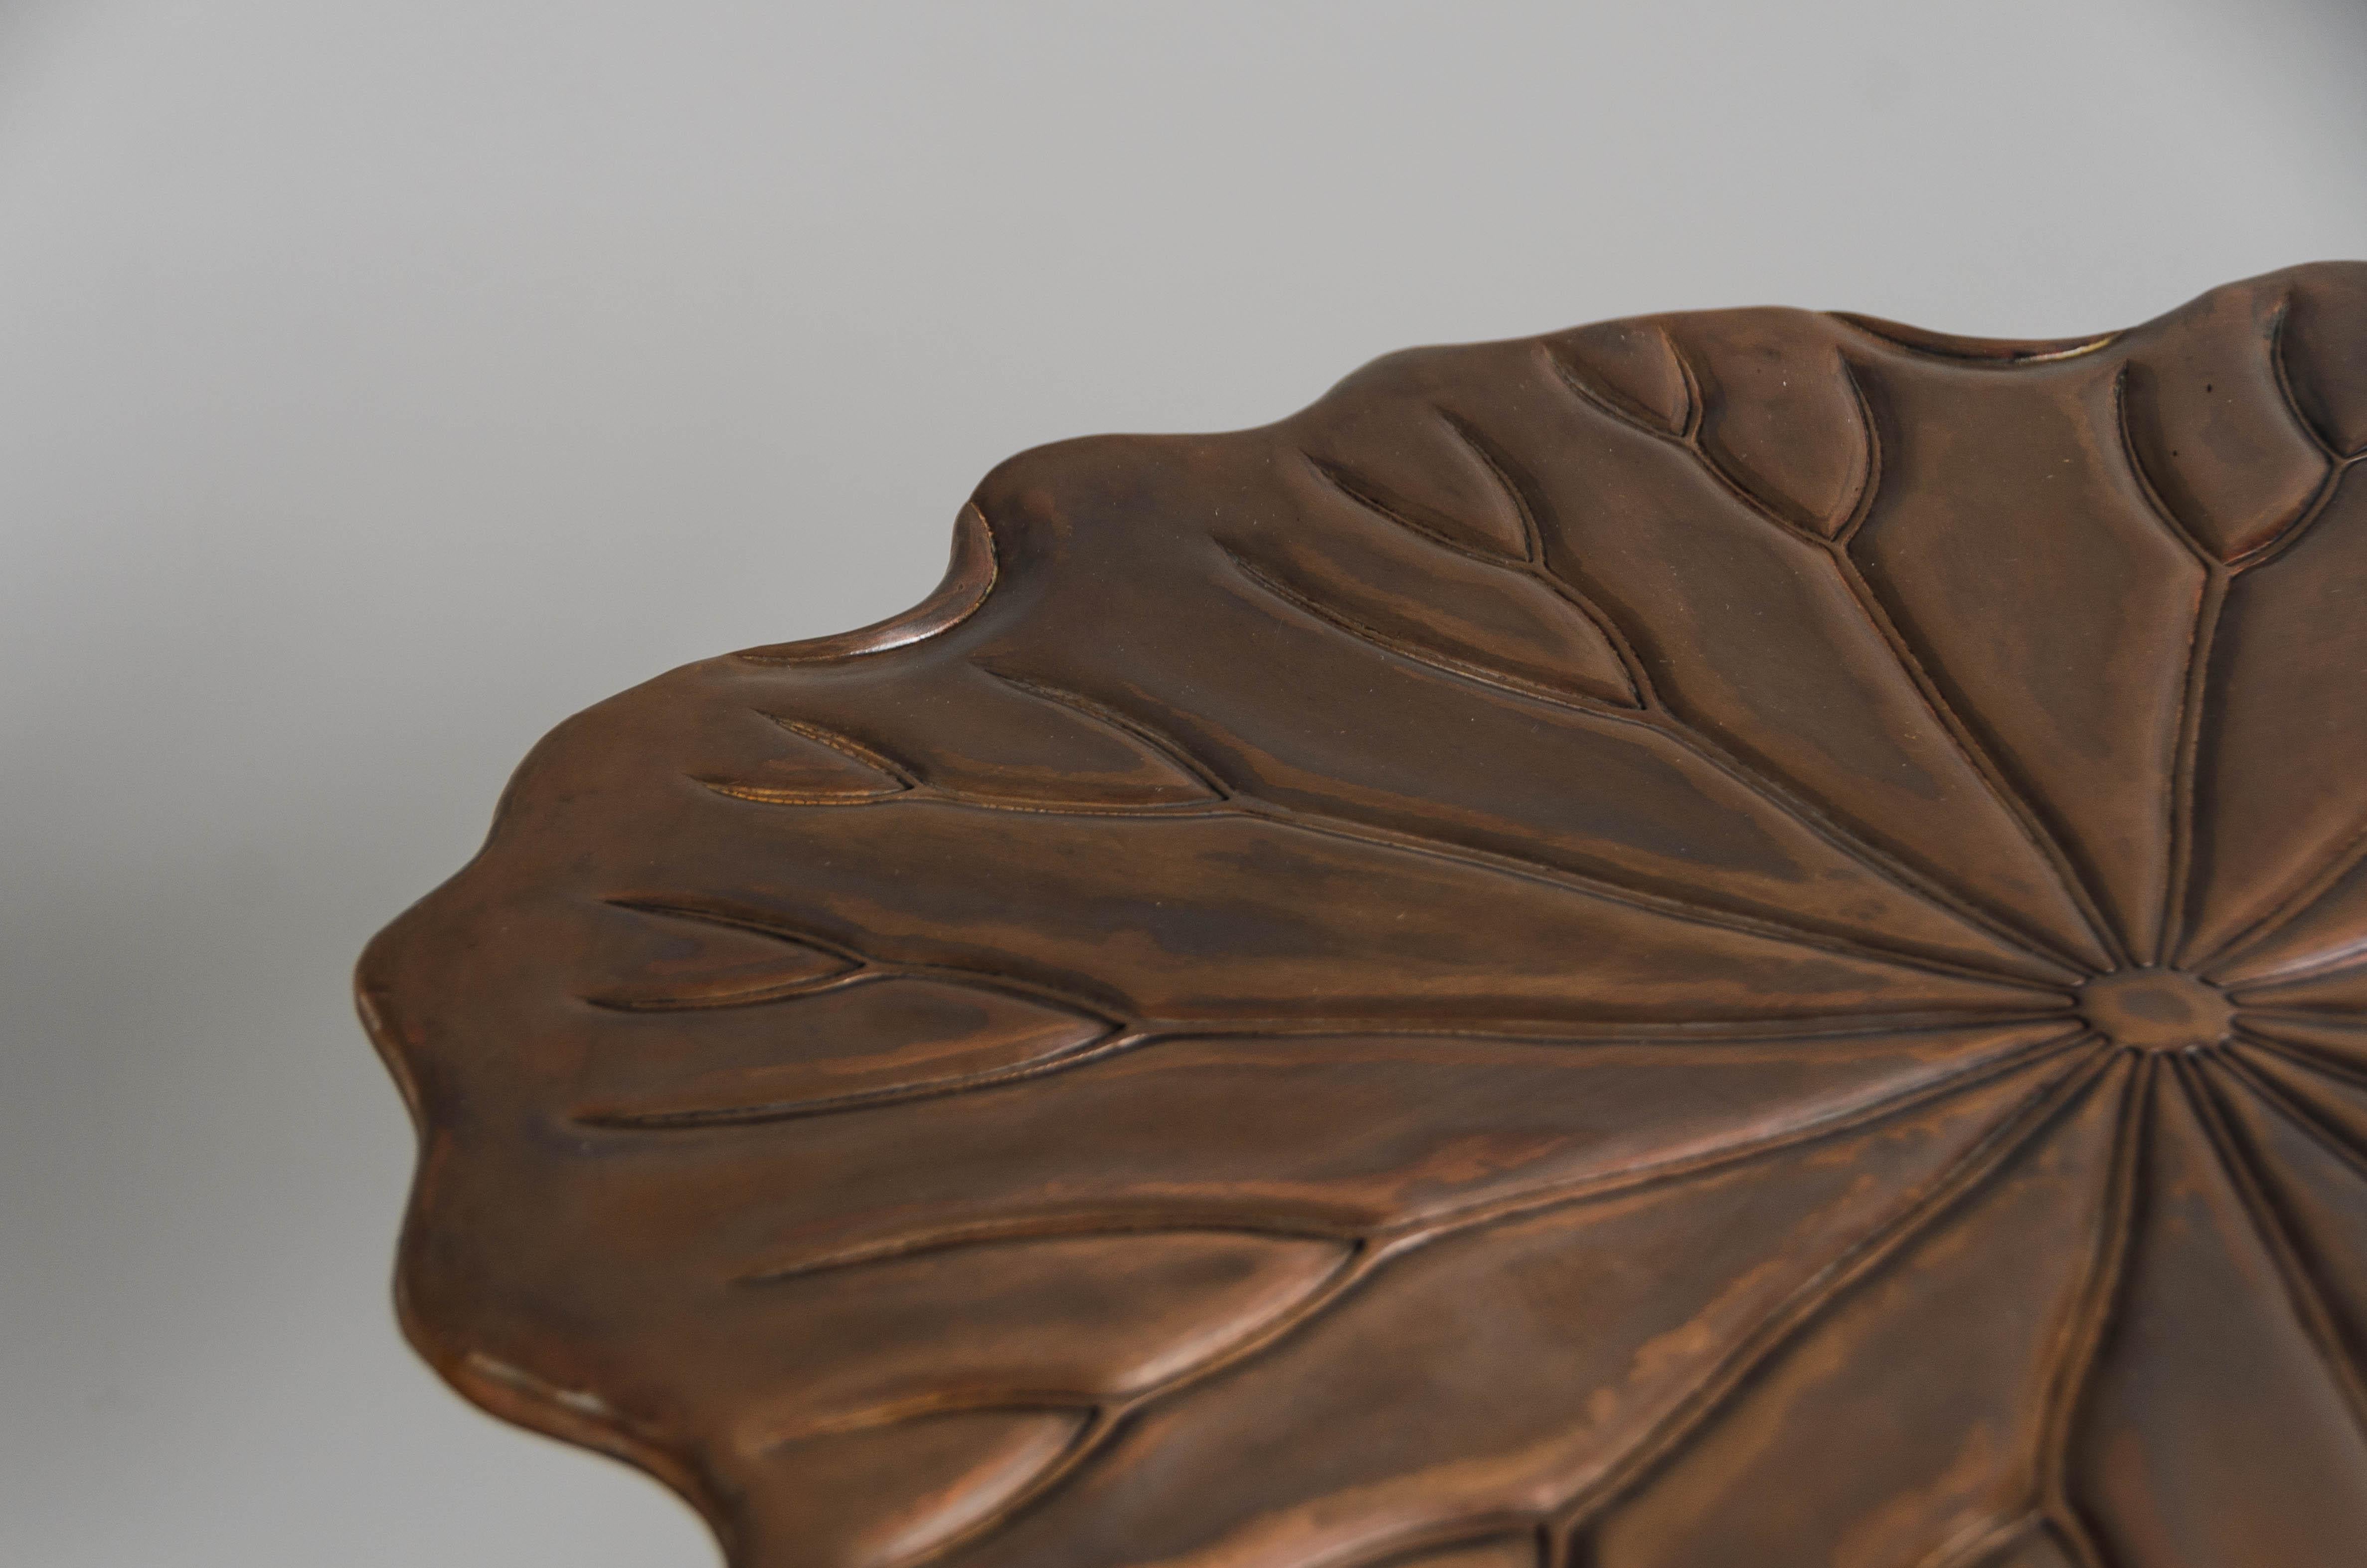 Water Lily Table in Antique Copper by Robert Kuo, Contemporary, Limited Edition For Sale 2